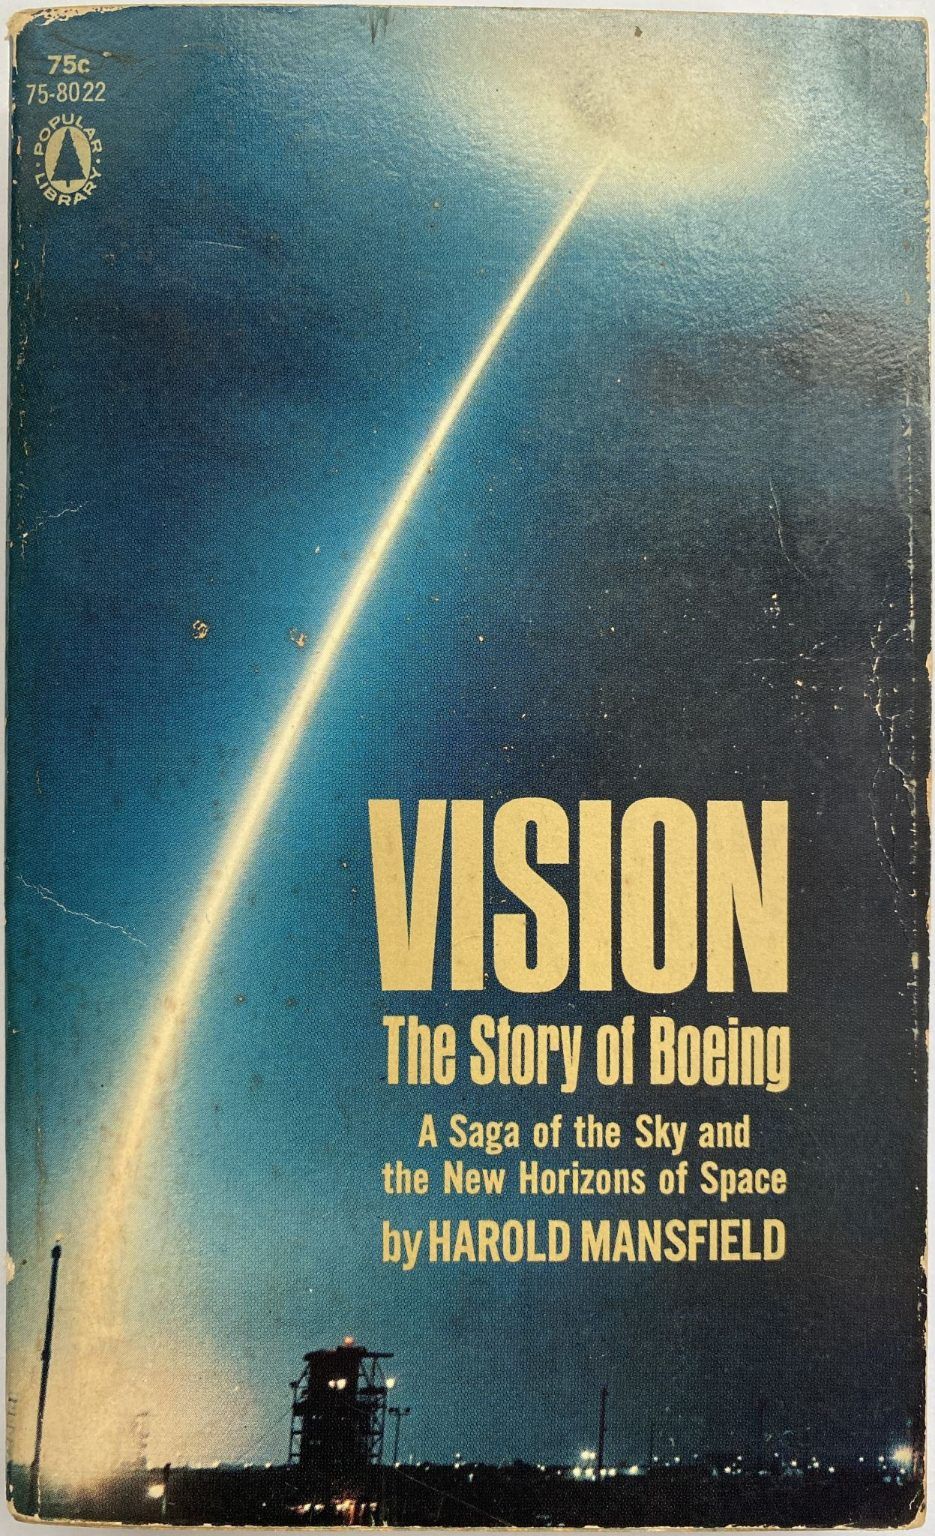 VISION: The Story Of Boeing - Saga of the Sky